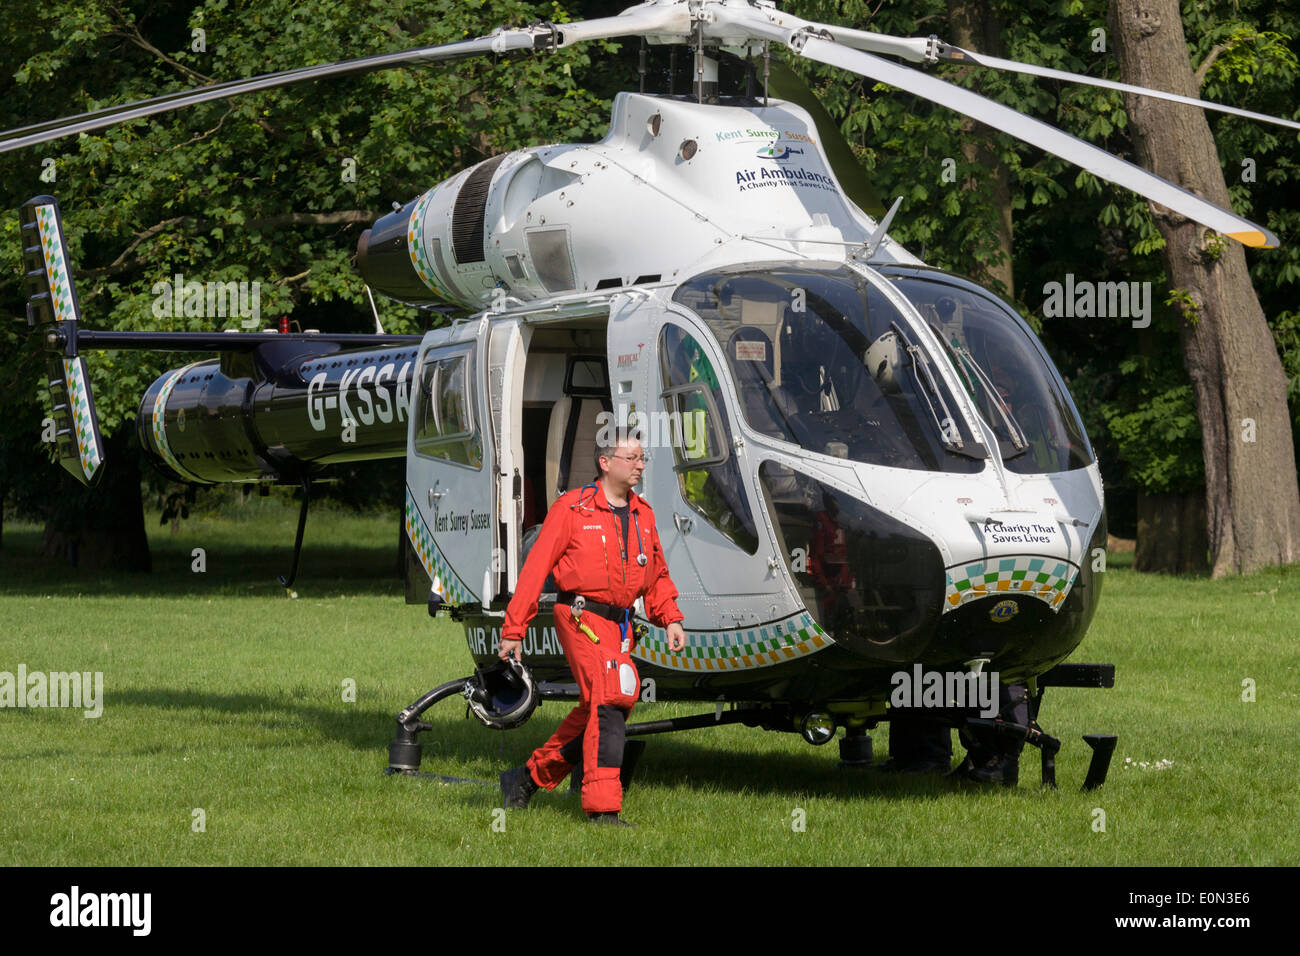 MD902 Explorer helicopter doctor crew from the Kent, Surrey & Sussex Air Ambulance Trust on the ground in Ruskin Park after emergency flight to Kings College Hospital in south London. Stock Photo